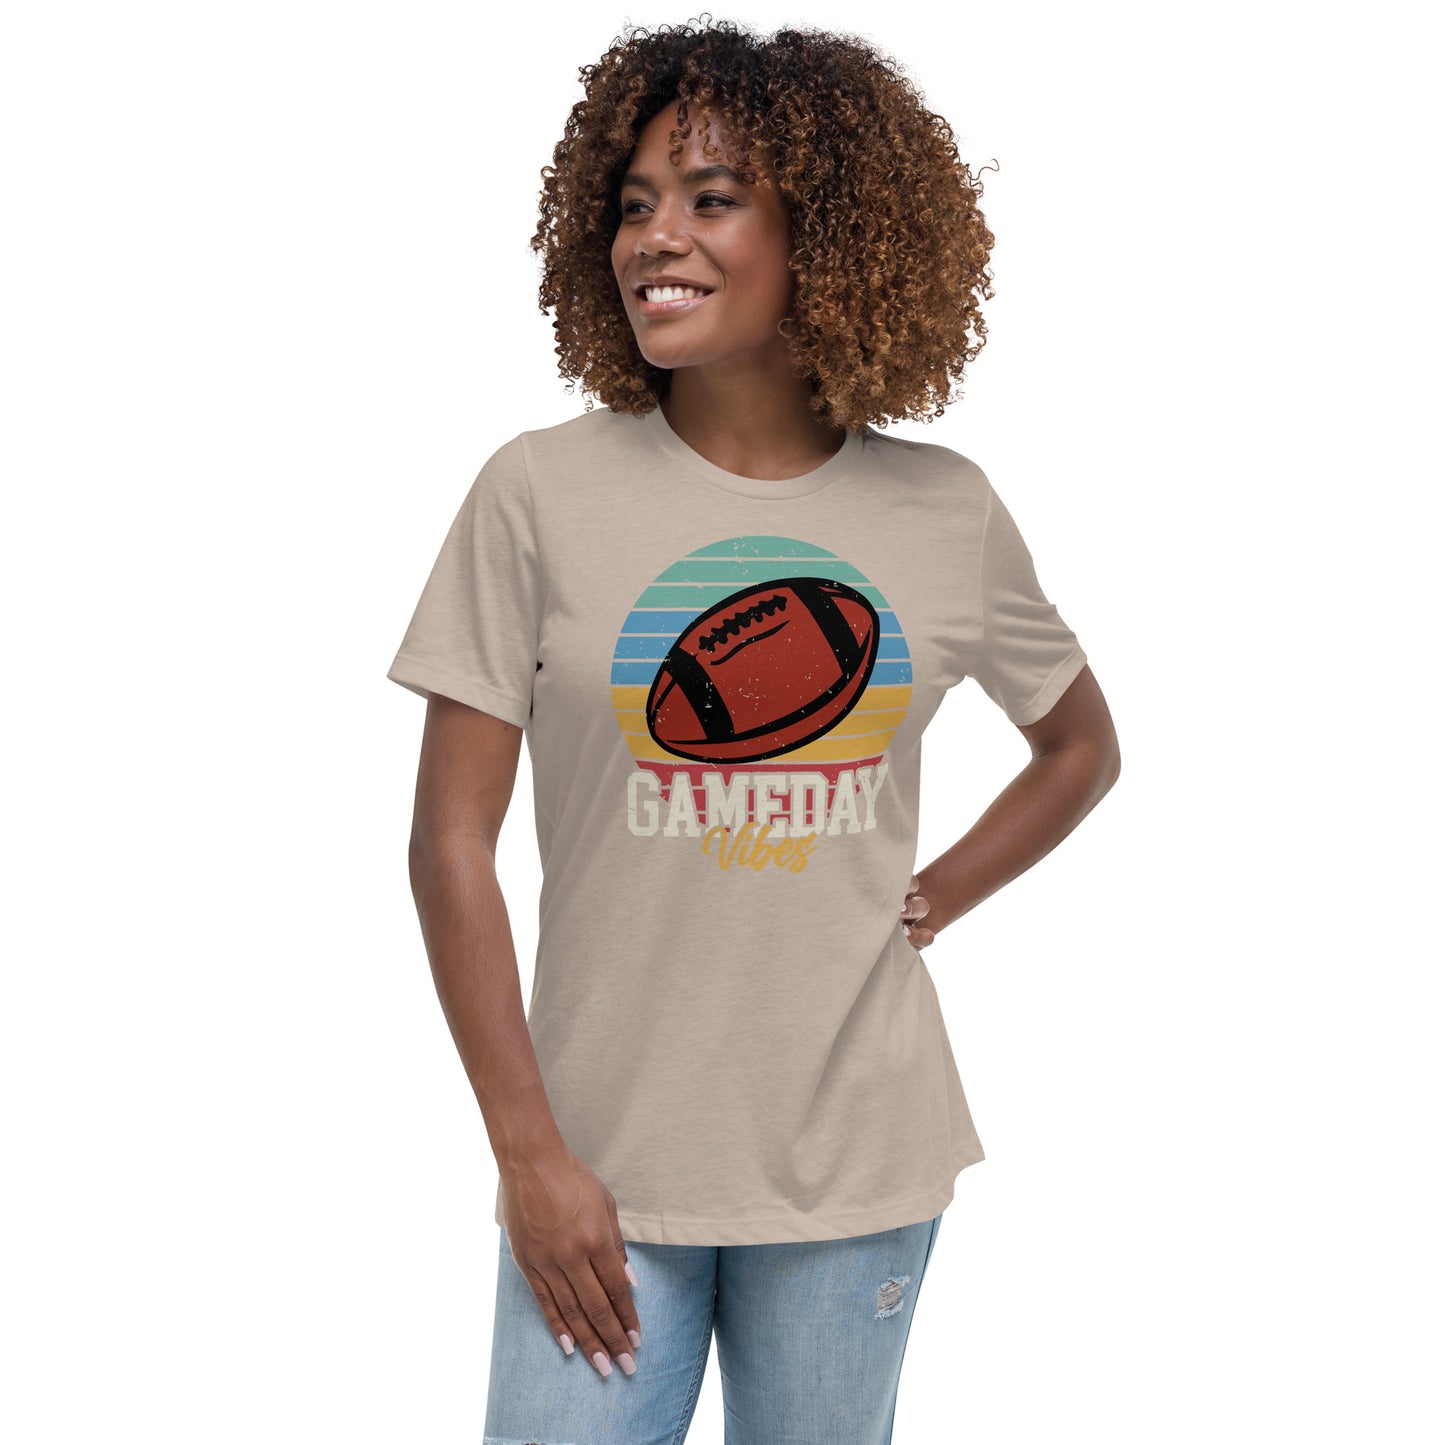 Game-Day Vibes Football Women's Relaxed T-Shirt